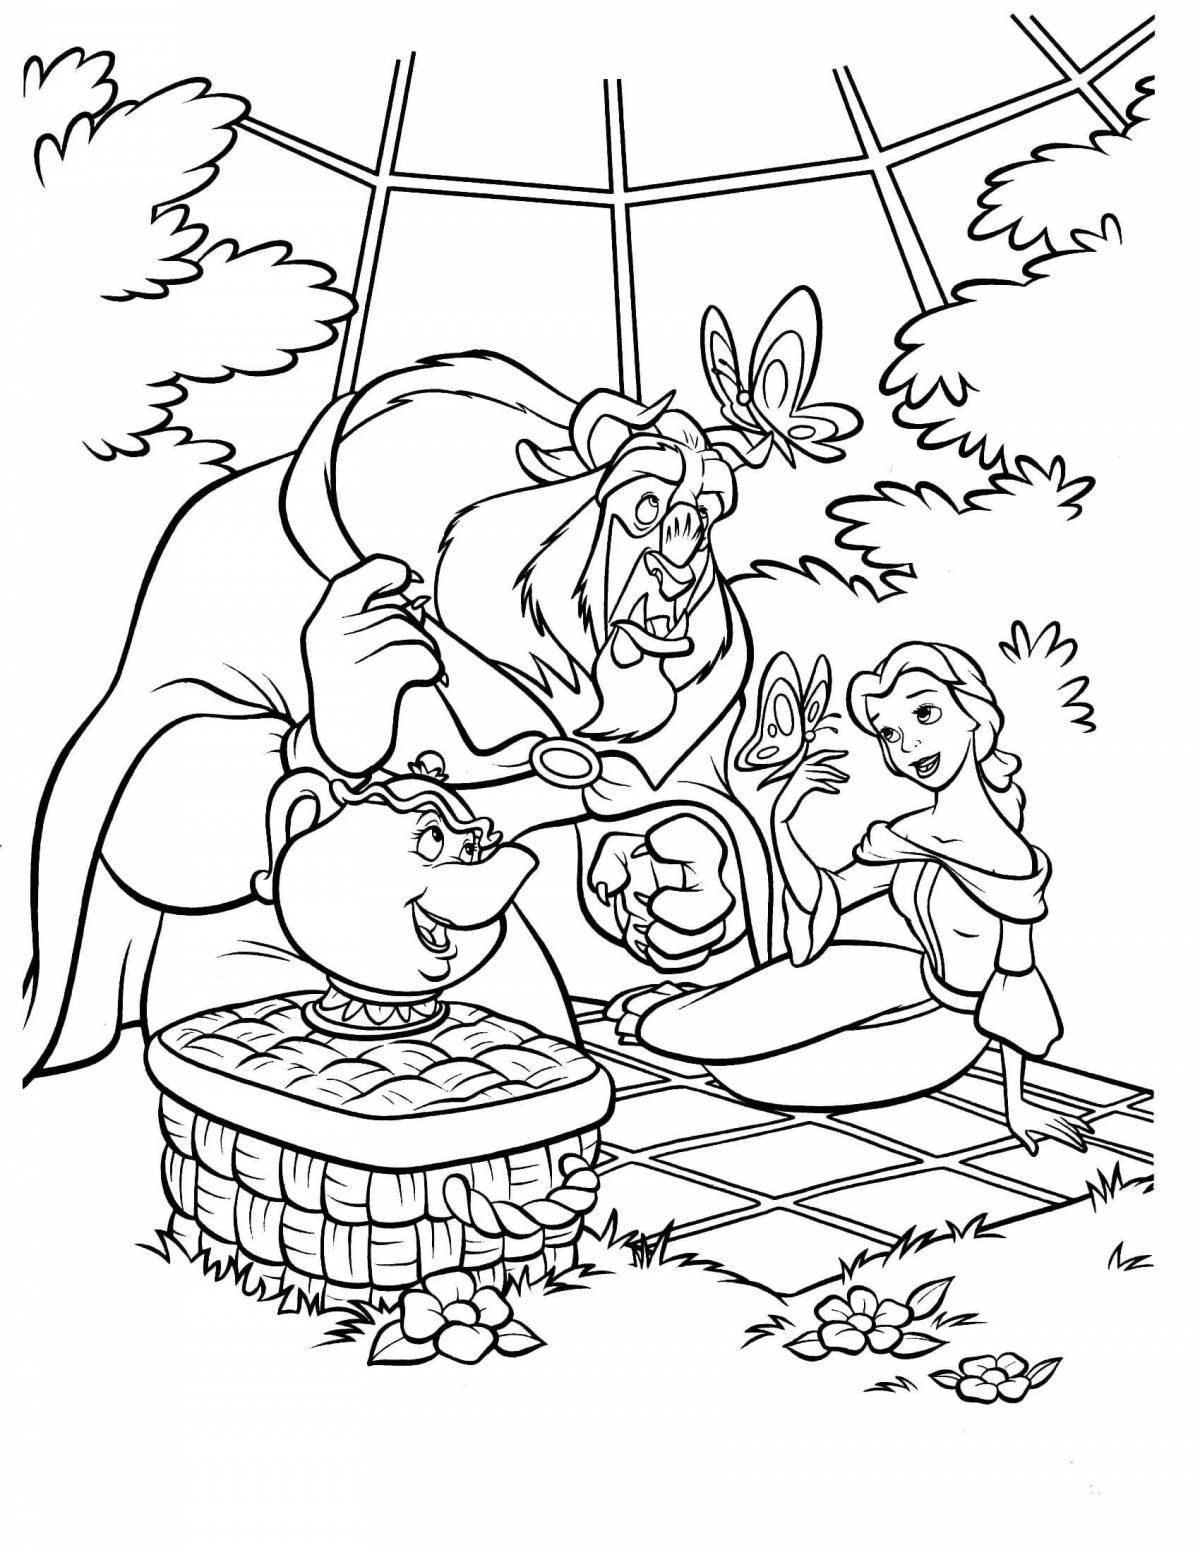 Exquisite beauty and the beast coloring pages for kids